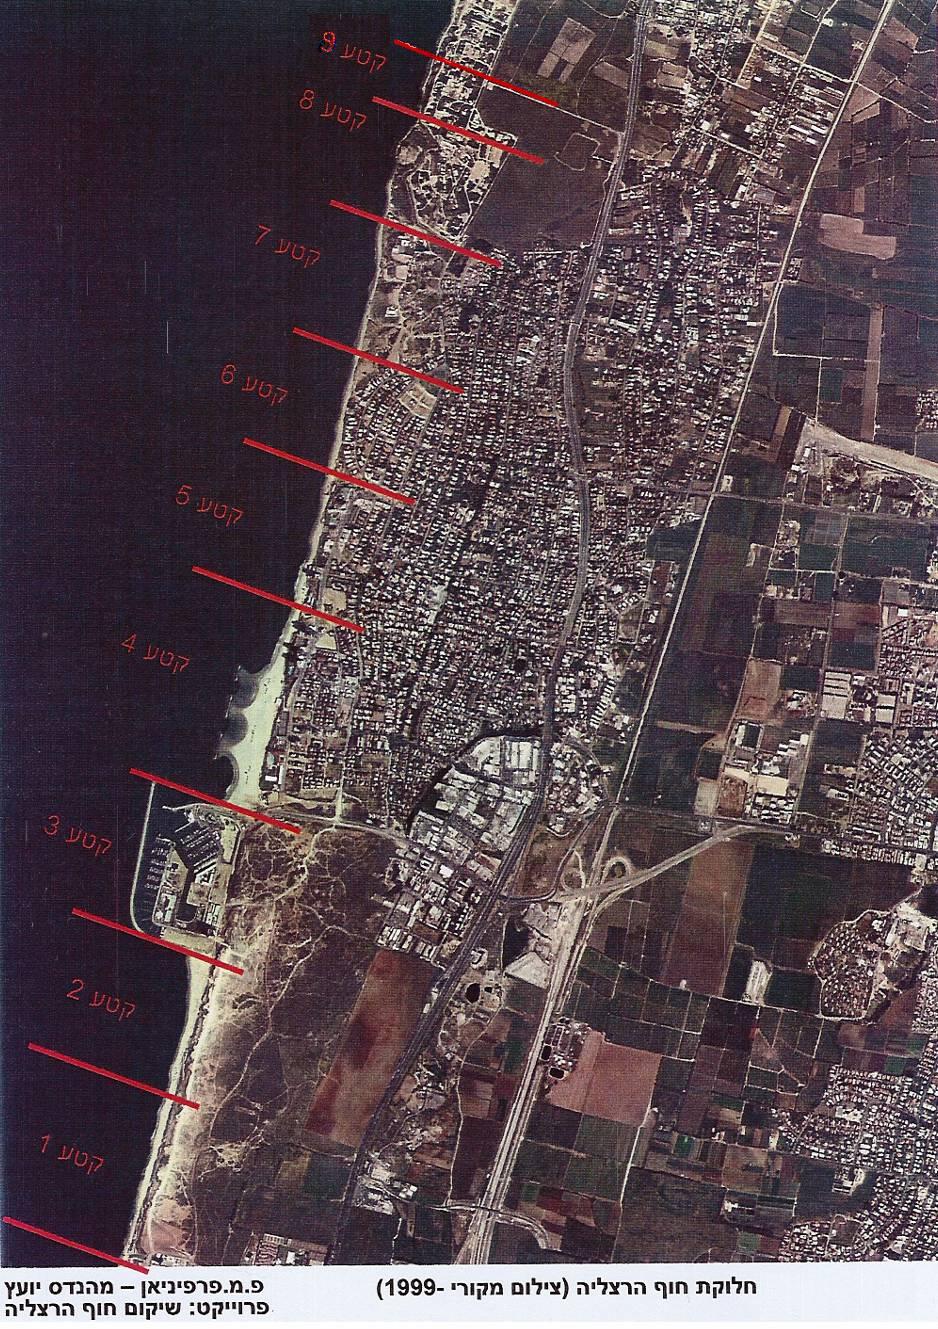 Recent reports on the Herzliya beach erosion have divided the region into 9 different zones, as shown in Figure 6. Zone 3 consists of the marina and Zone 4 contains the three breakwaters.